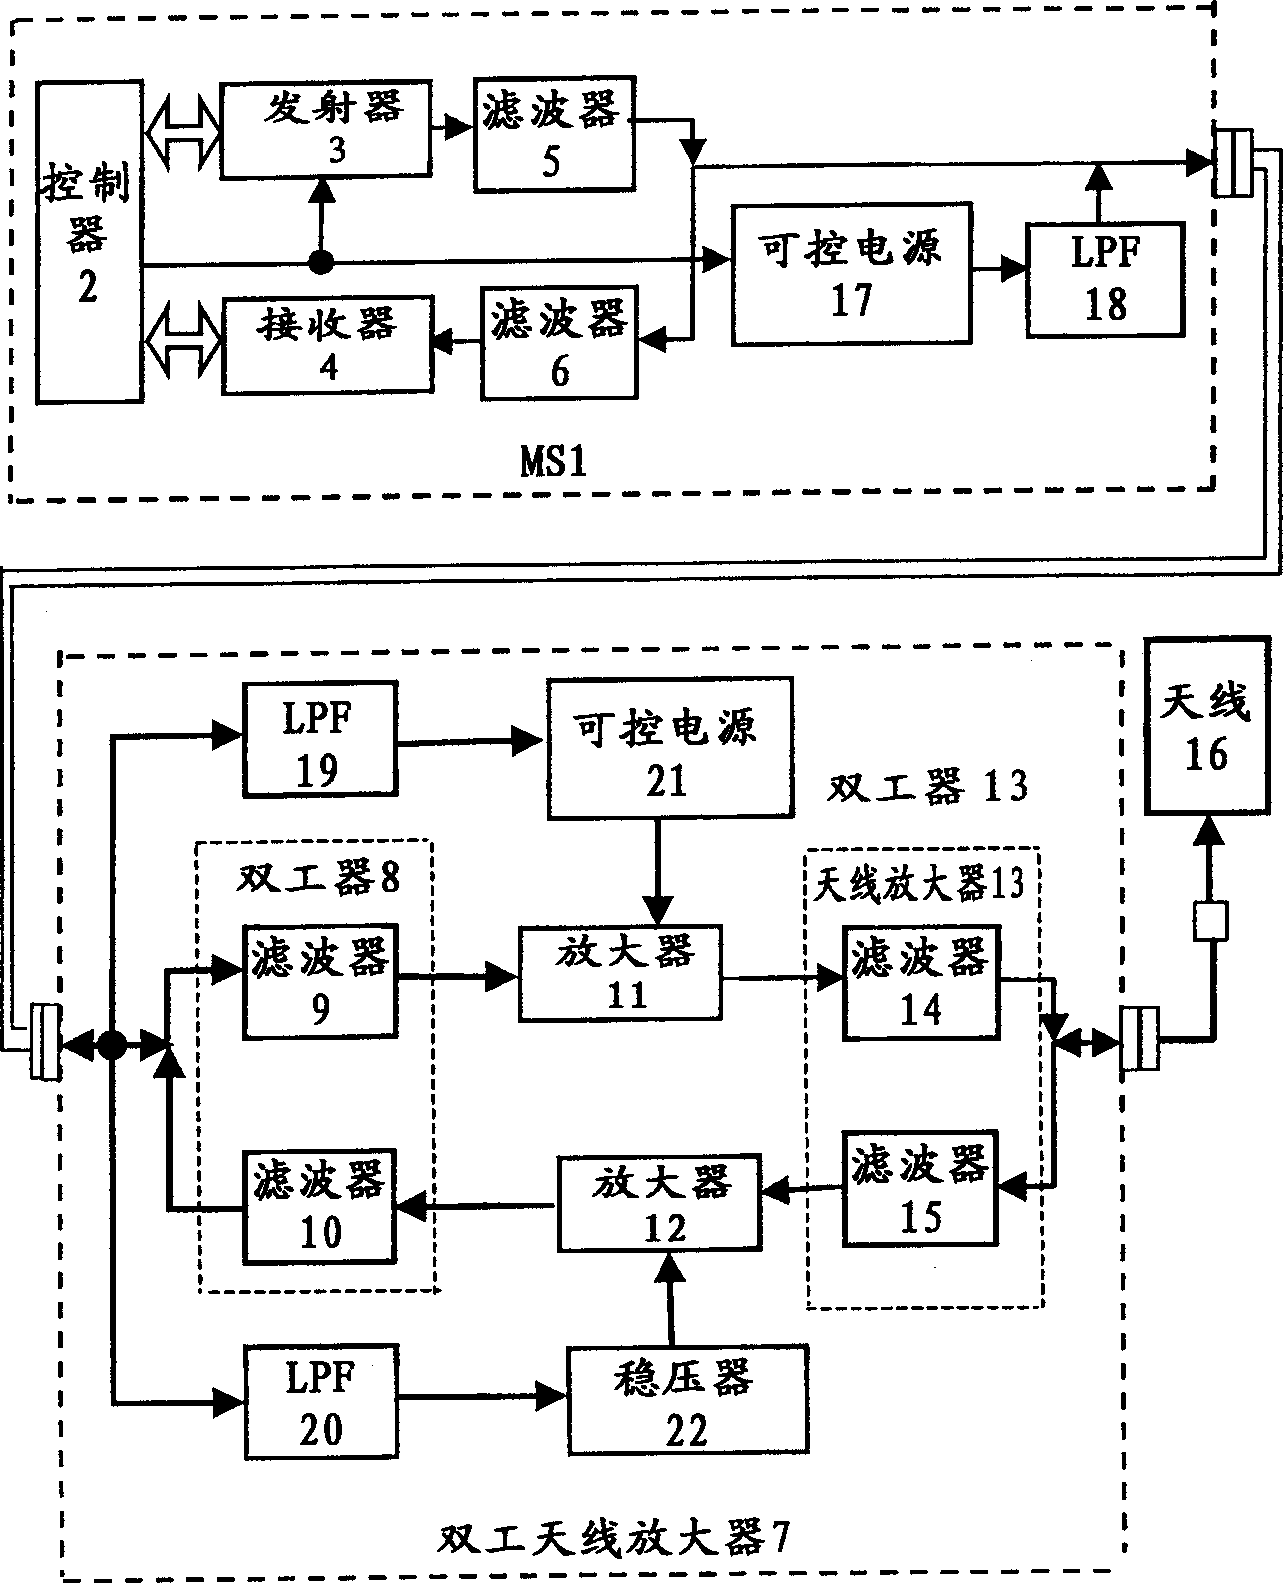 Subscriber station with duplex antenna amplifier